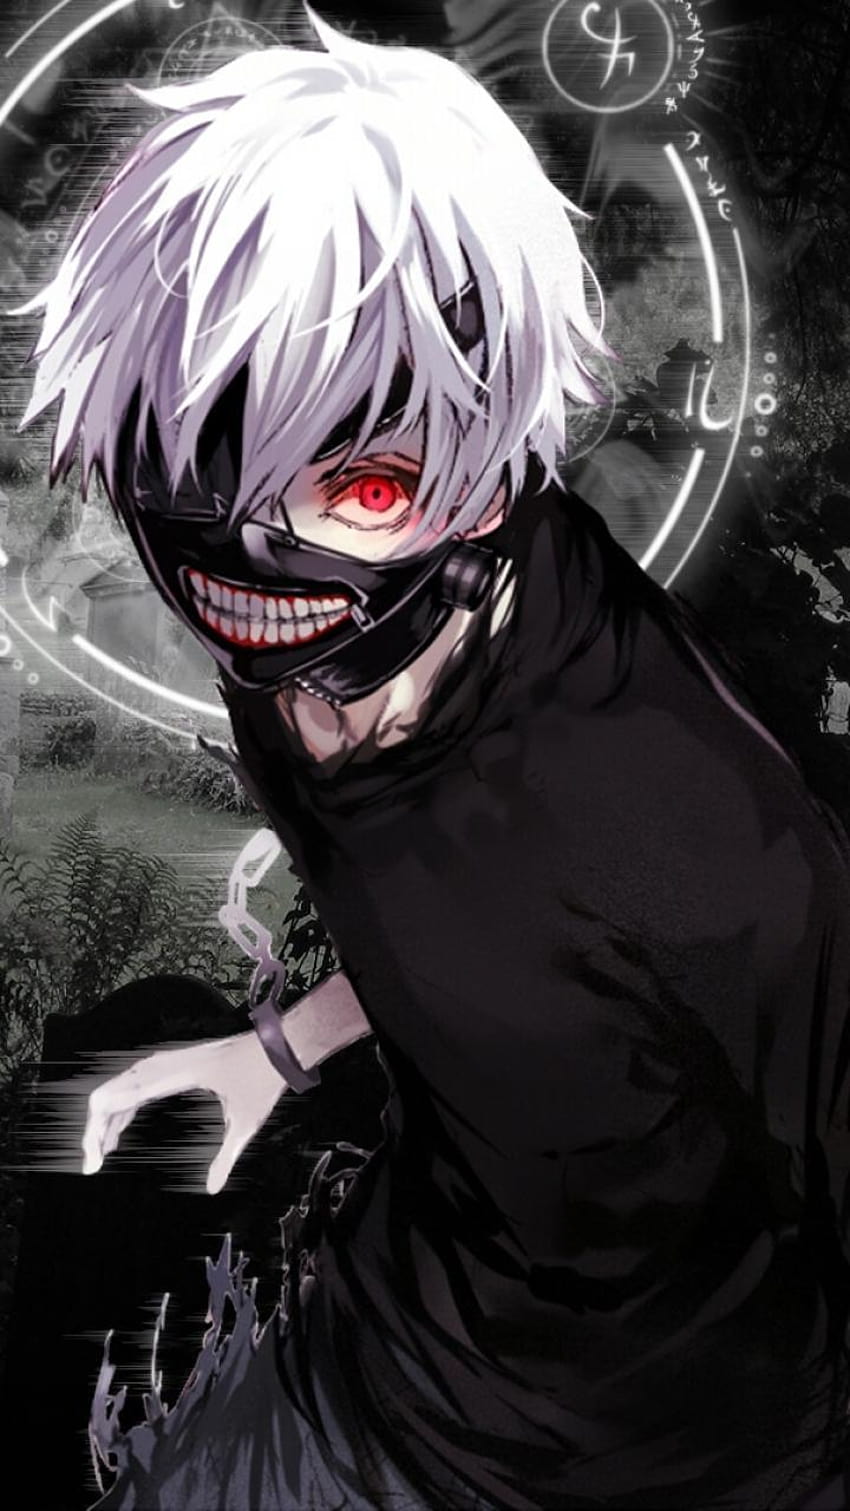 Ken Kaneki Ghoul for Android, anime tokyo ghoul android HD phone wallpaper